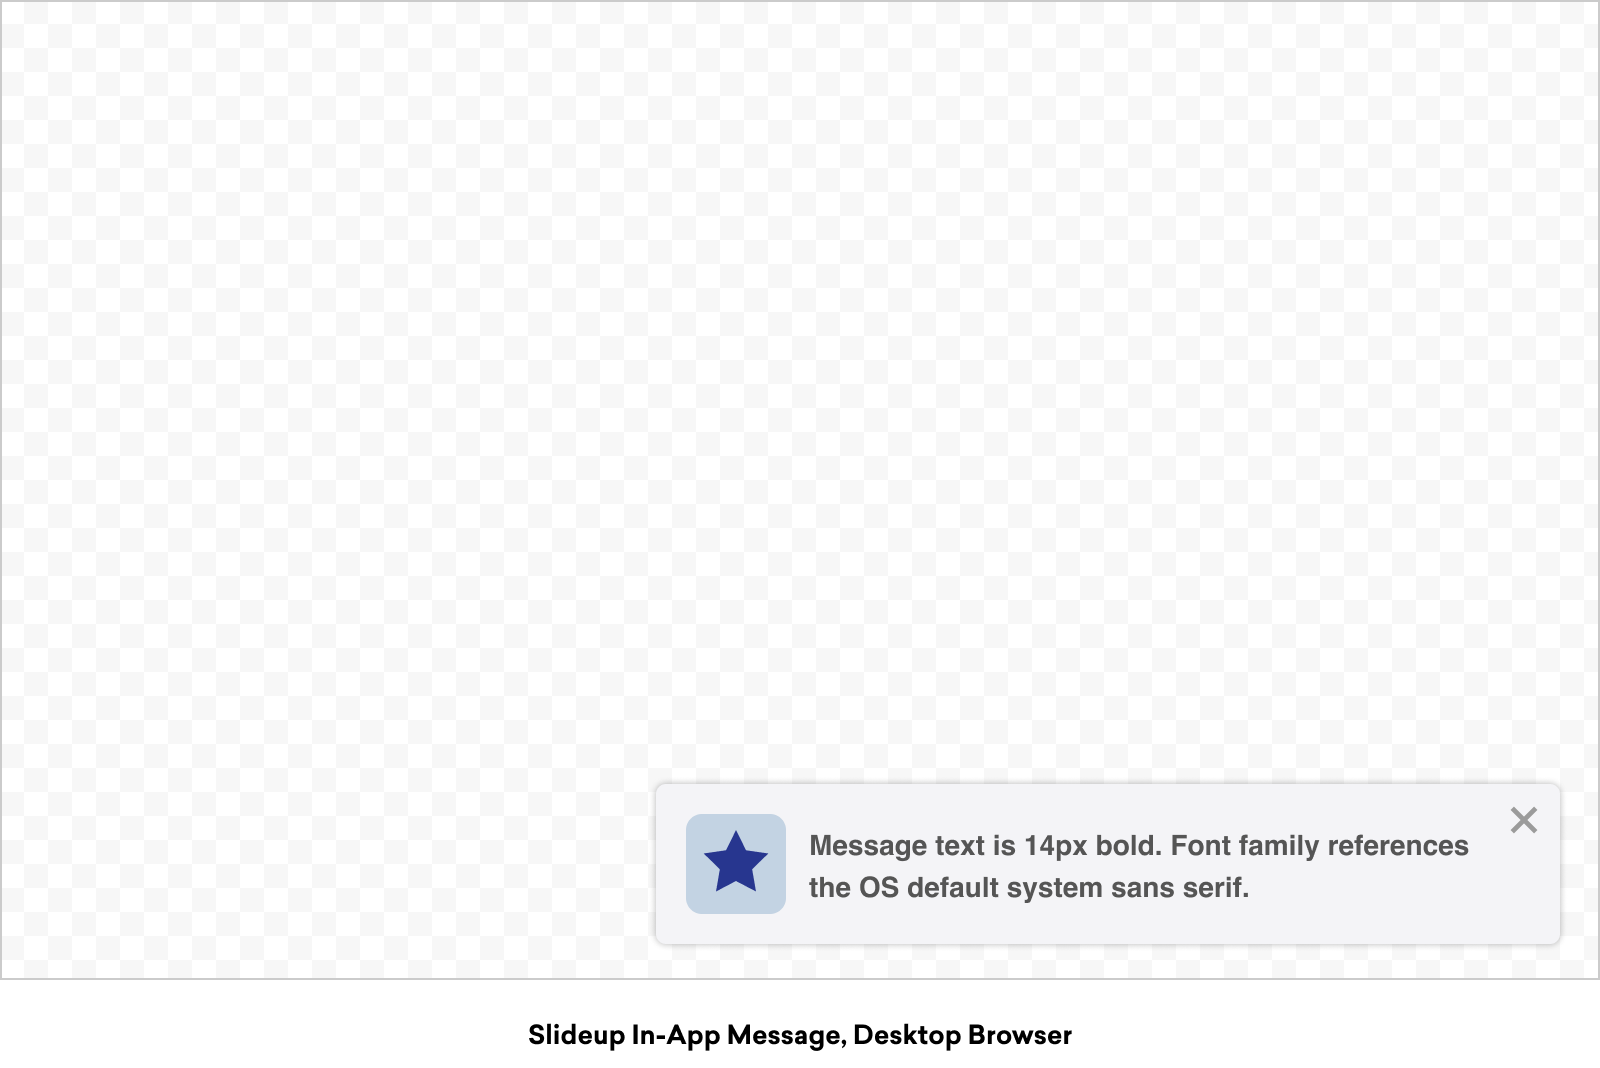 Slideup in-app message as it appears on a desktop browser. The message appears in the bottom-right corner of the screen and does not take up the full width of the screen.